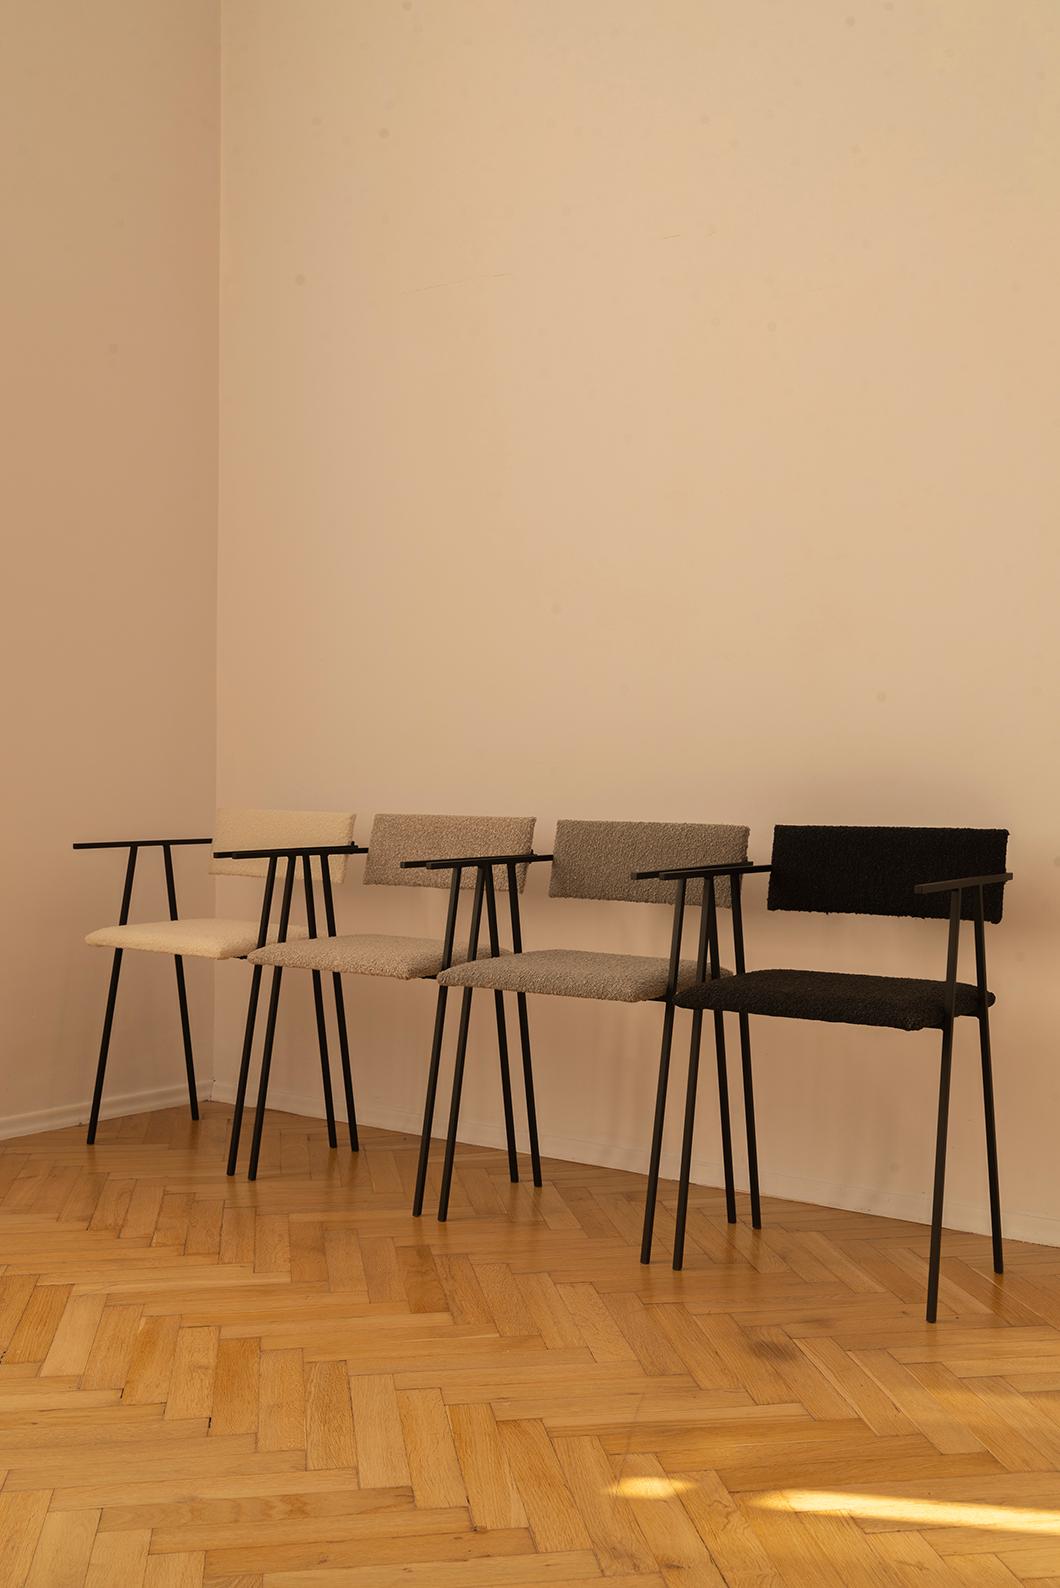 Set of 4 object 058 chairs by NG Design
Dimensions: D 45 x W 42 x H 75 cm
Materials: Powder coated steel, Boucle upholstery.

Also available: All of objects available in different materials and colors on demand.

Object058 is a comfortable